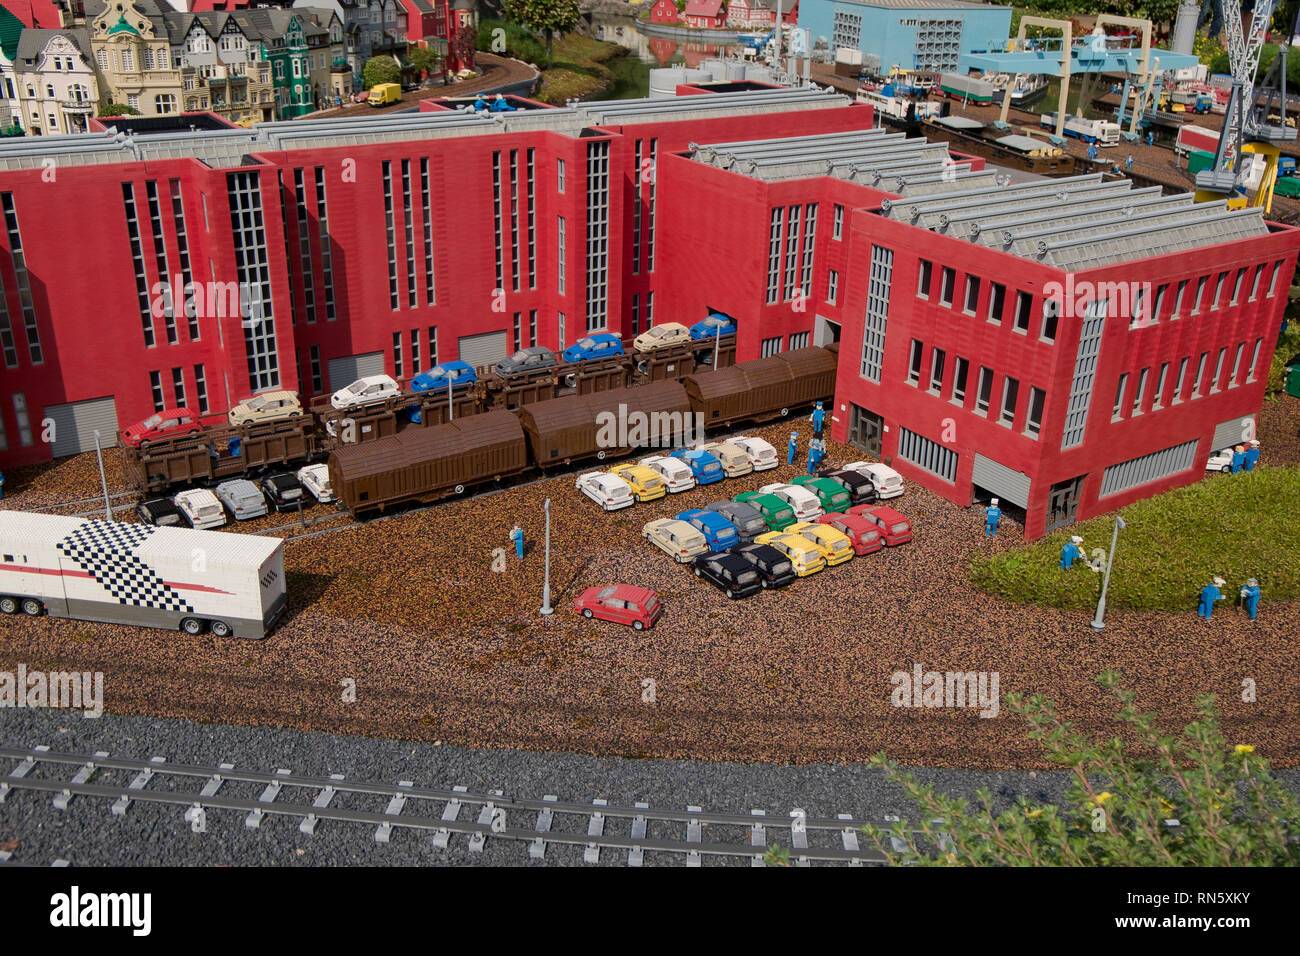 An automobile factory made of Lego and Lego cars at Legoland Billund resort in Denmark. Stock Photo